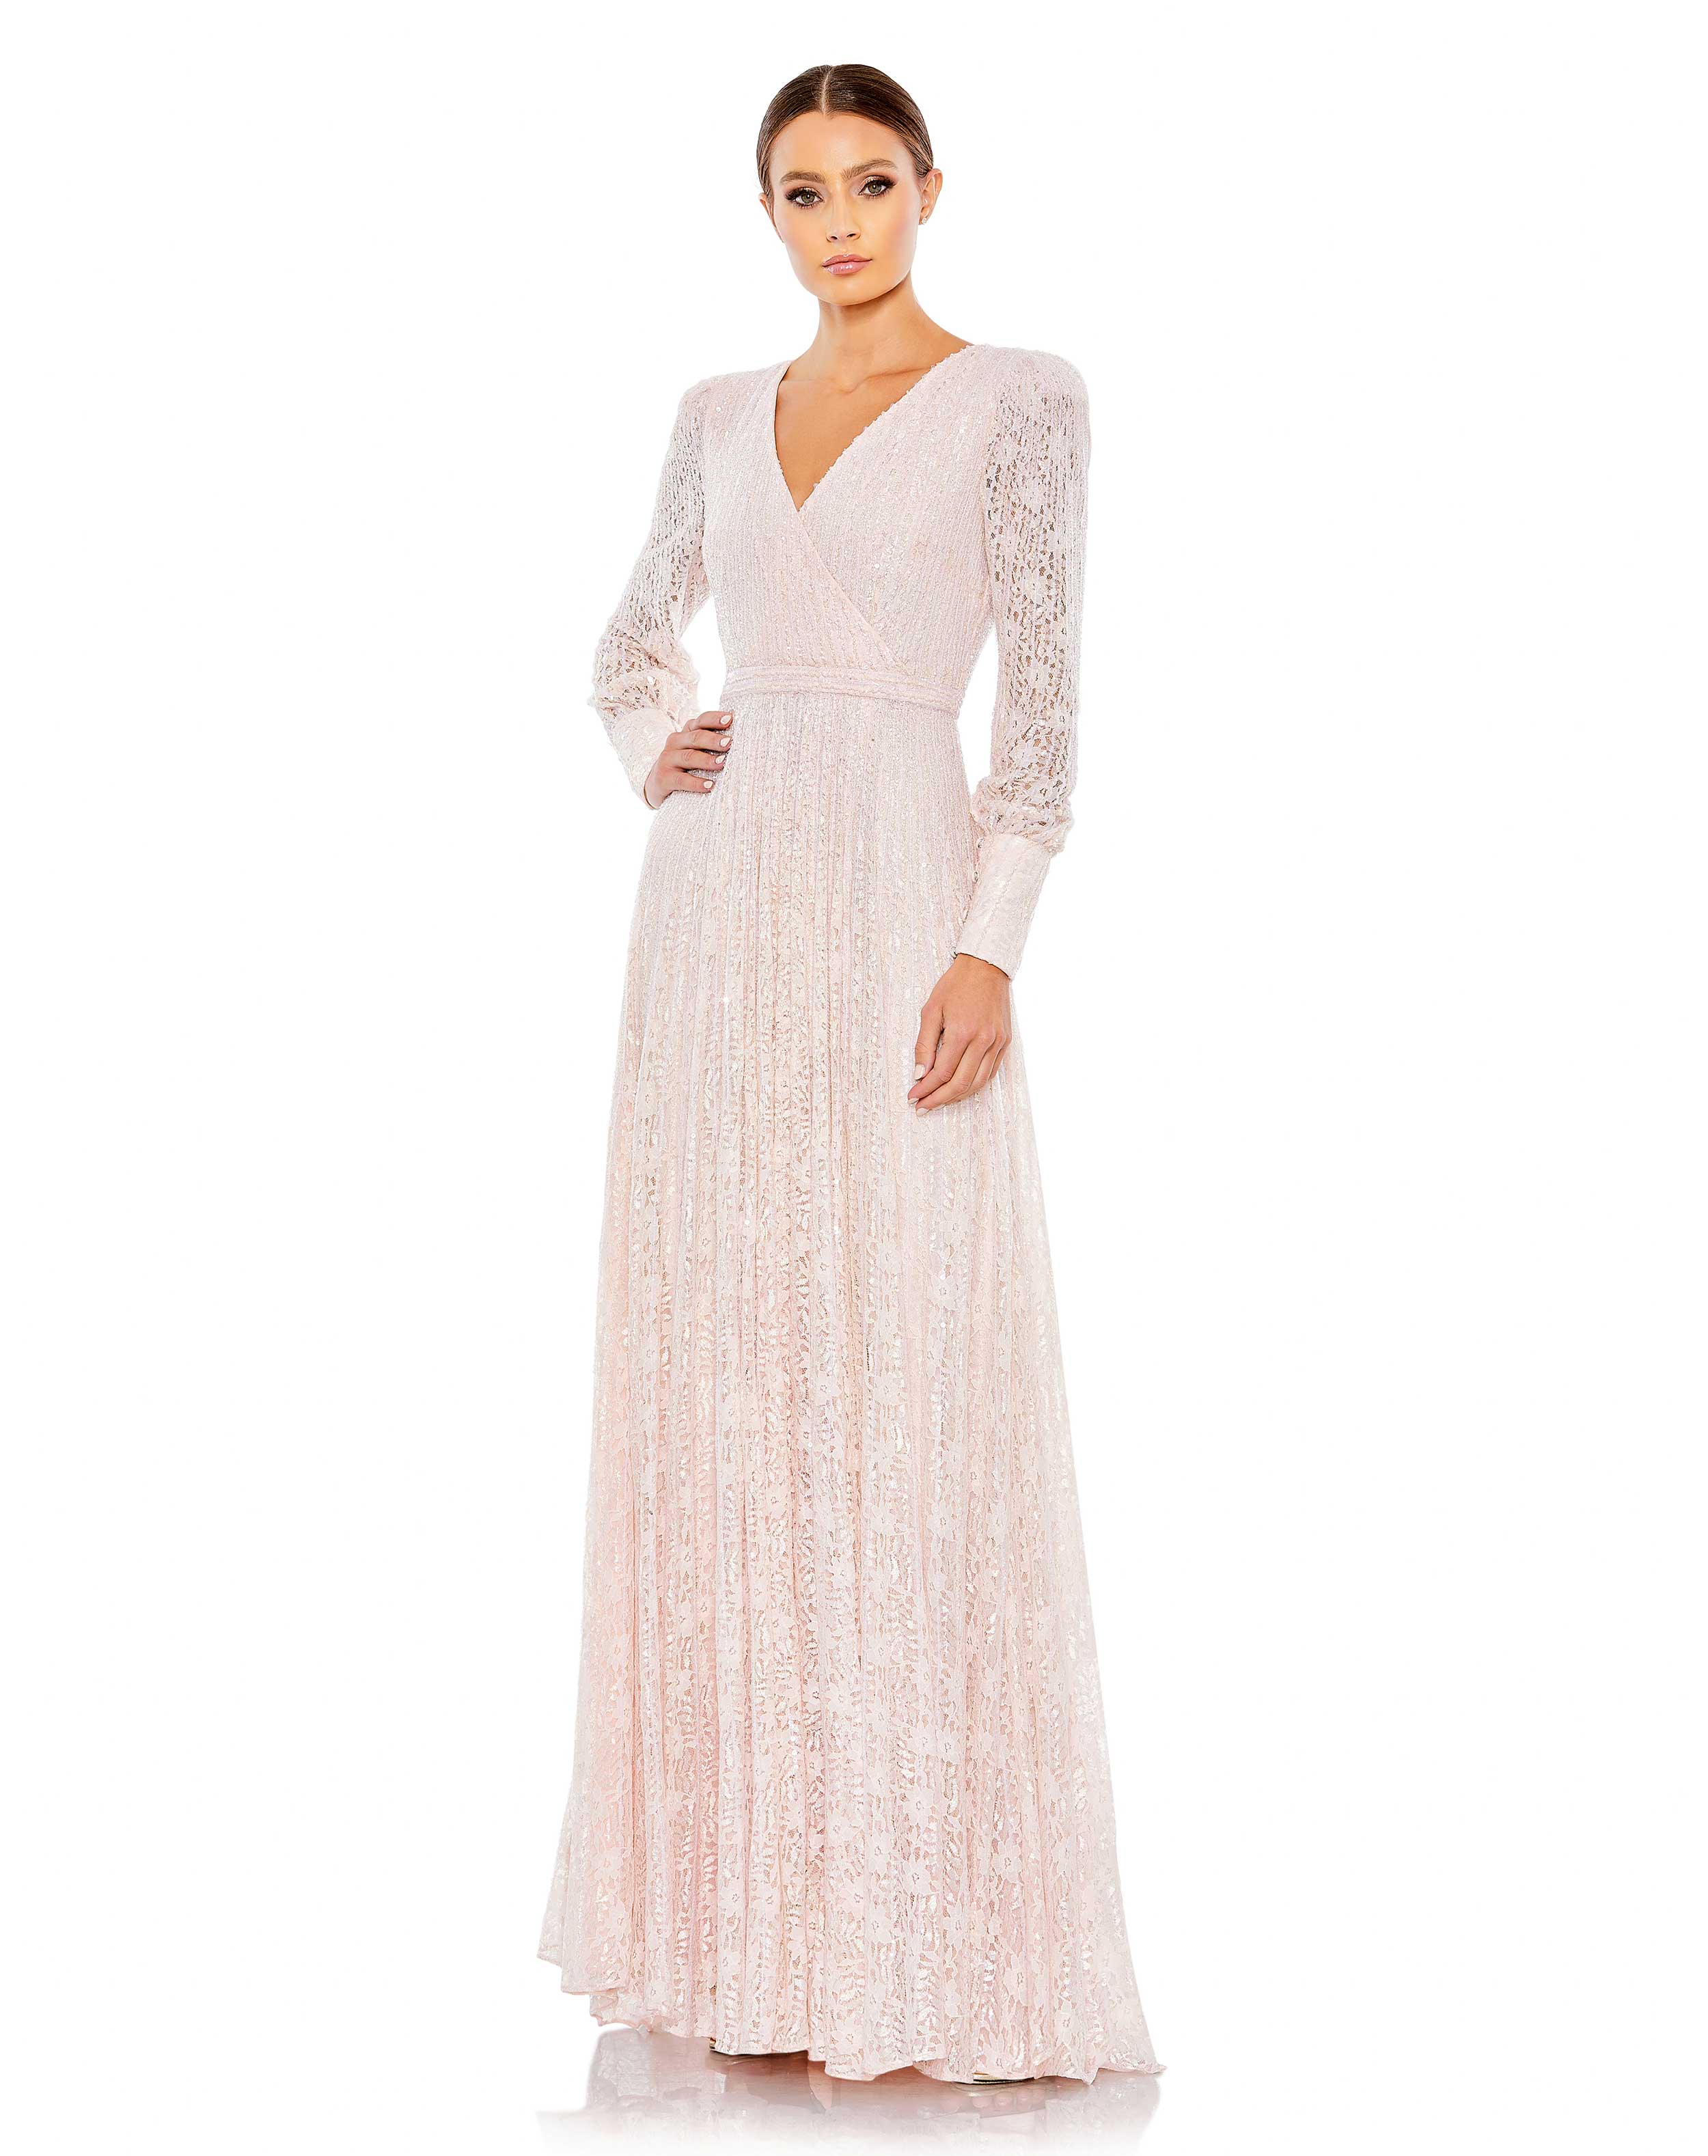 Beaded Lace Long Sleeve Wrap Over Gown